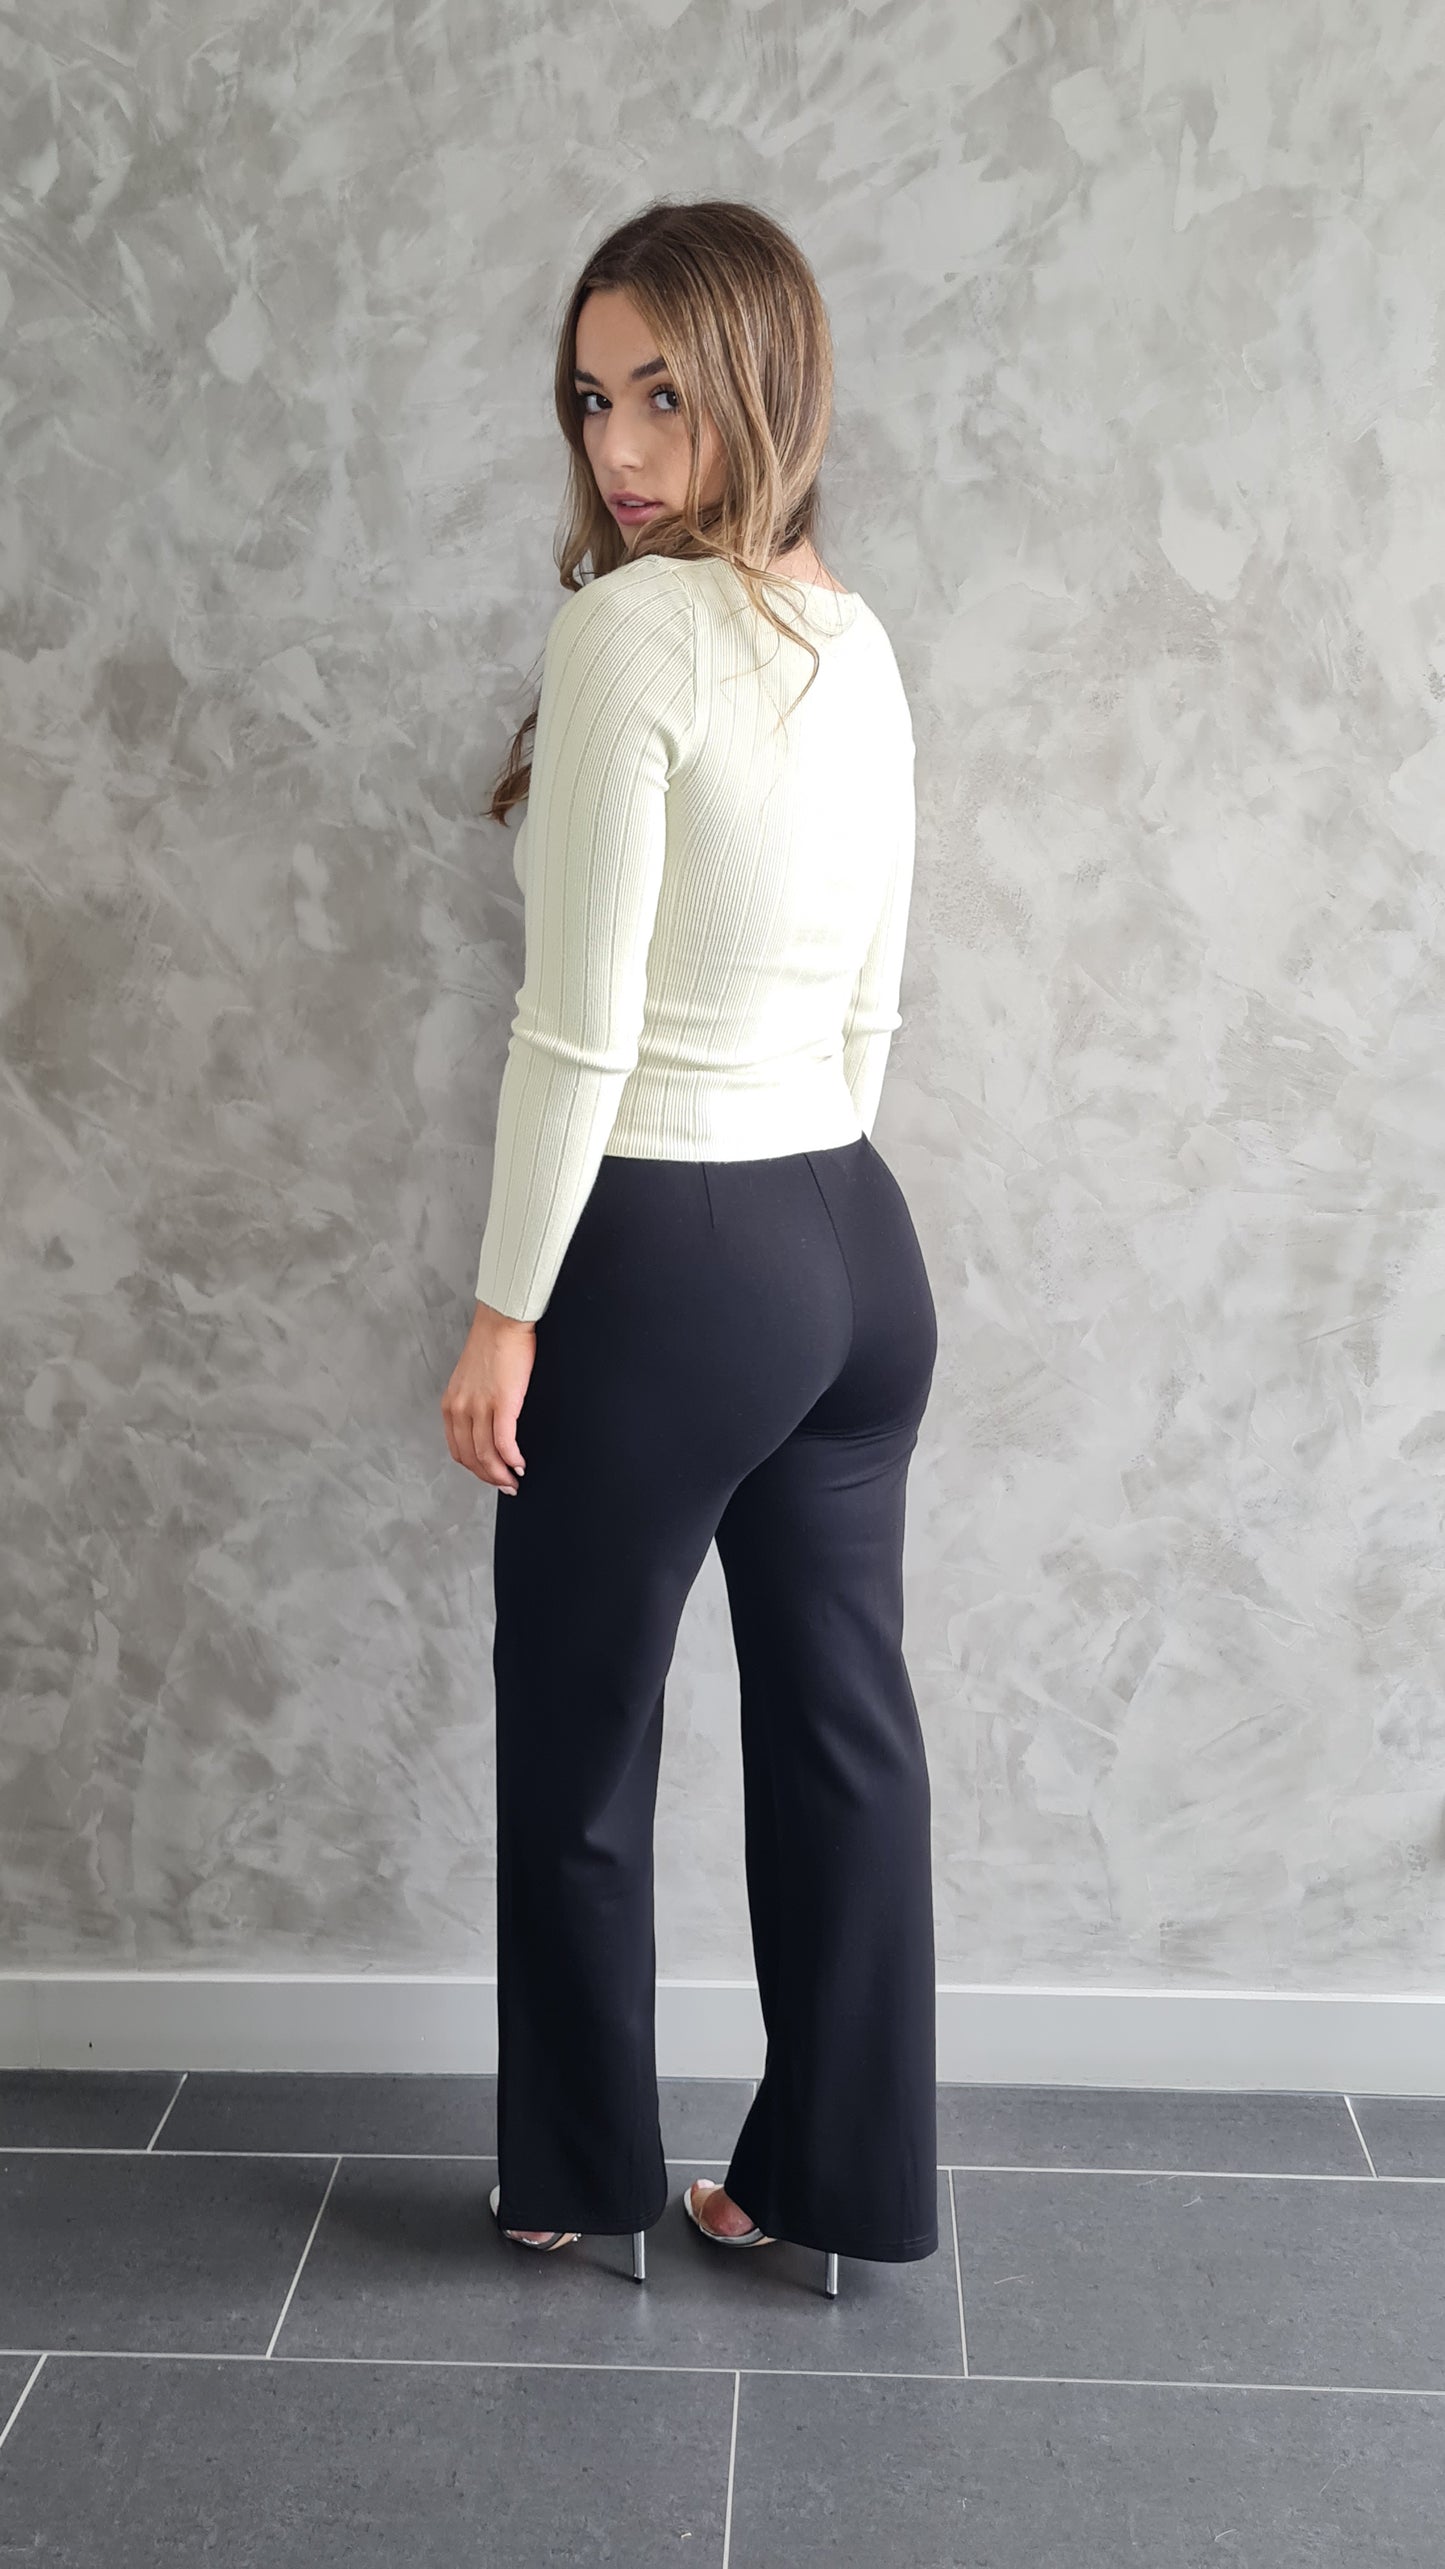 Hadley Long Black Tailored Flared Pants